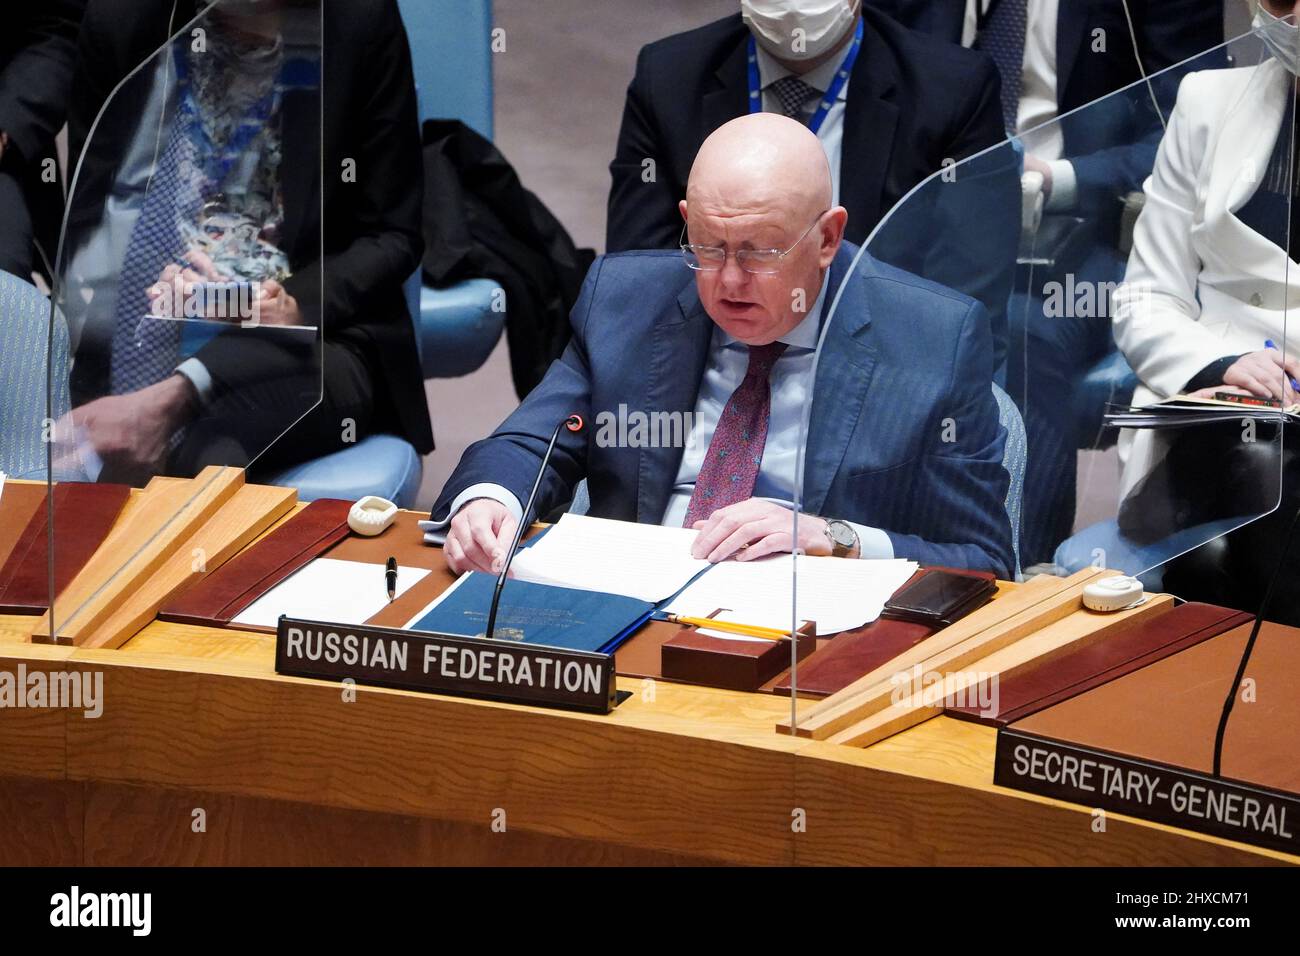 Russia's Ambassador to the U.N. Vasily Nebenzya attends the United Nations Security Council meeting on Threats to International Peace and Security, following Russia's invasion of Ukraine, in New York City, U.S. March 11, 2022. REUTERS/Carlo Allegri Stock Photo